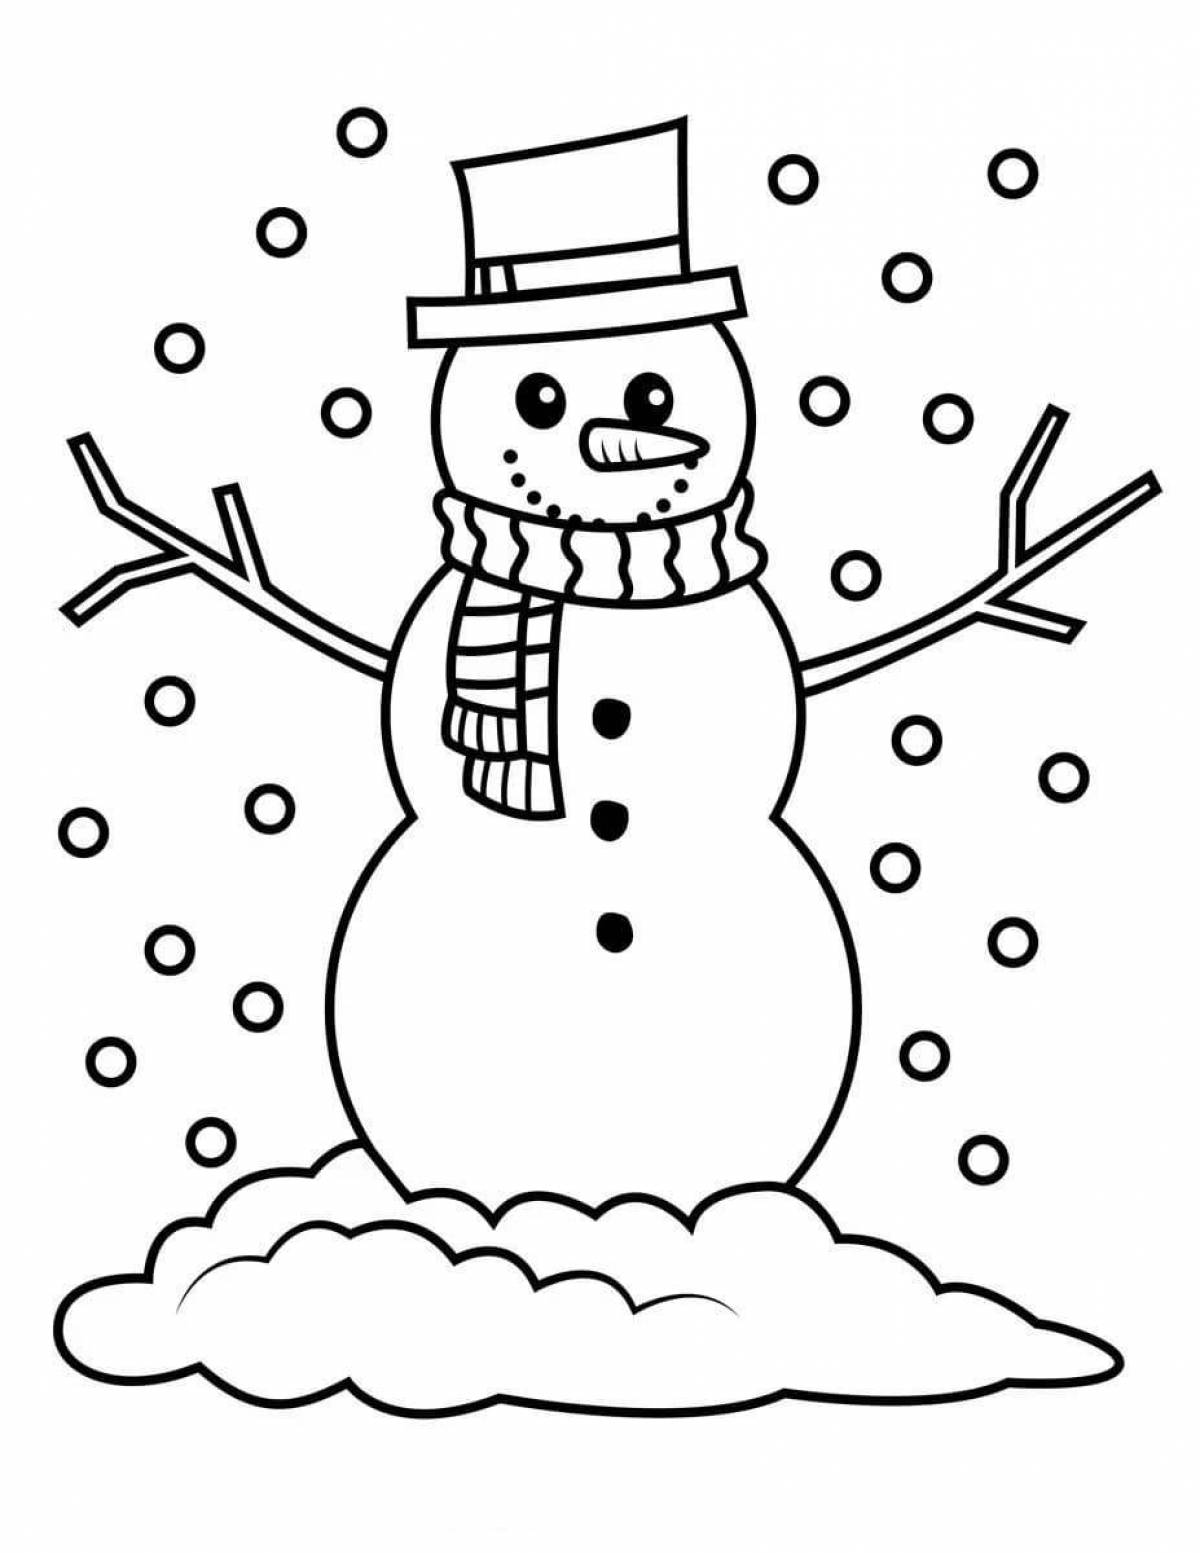 Funny snowman coloring for kids